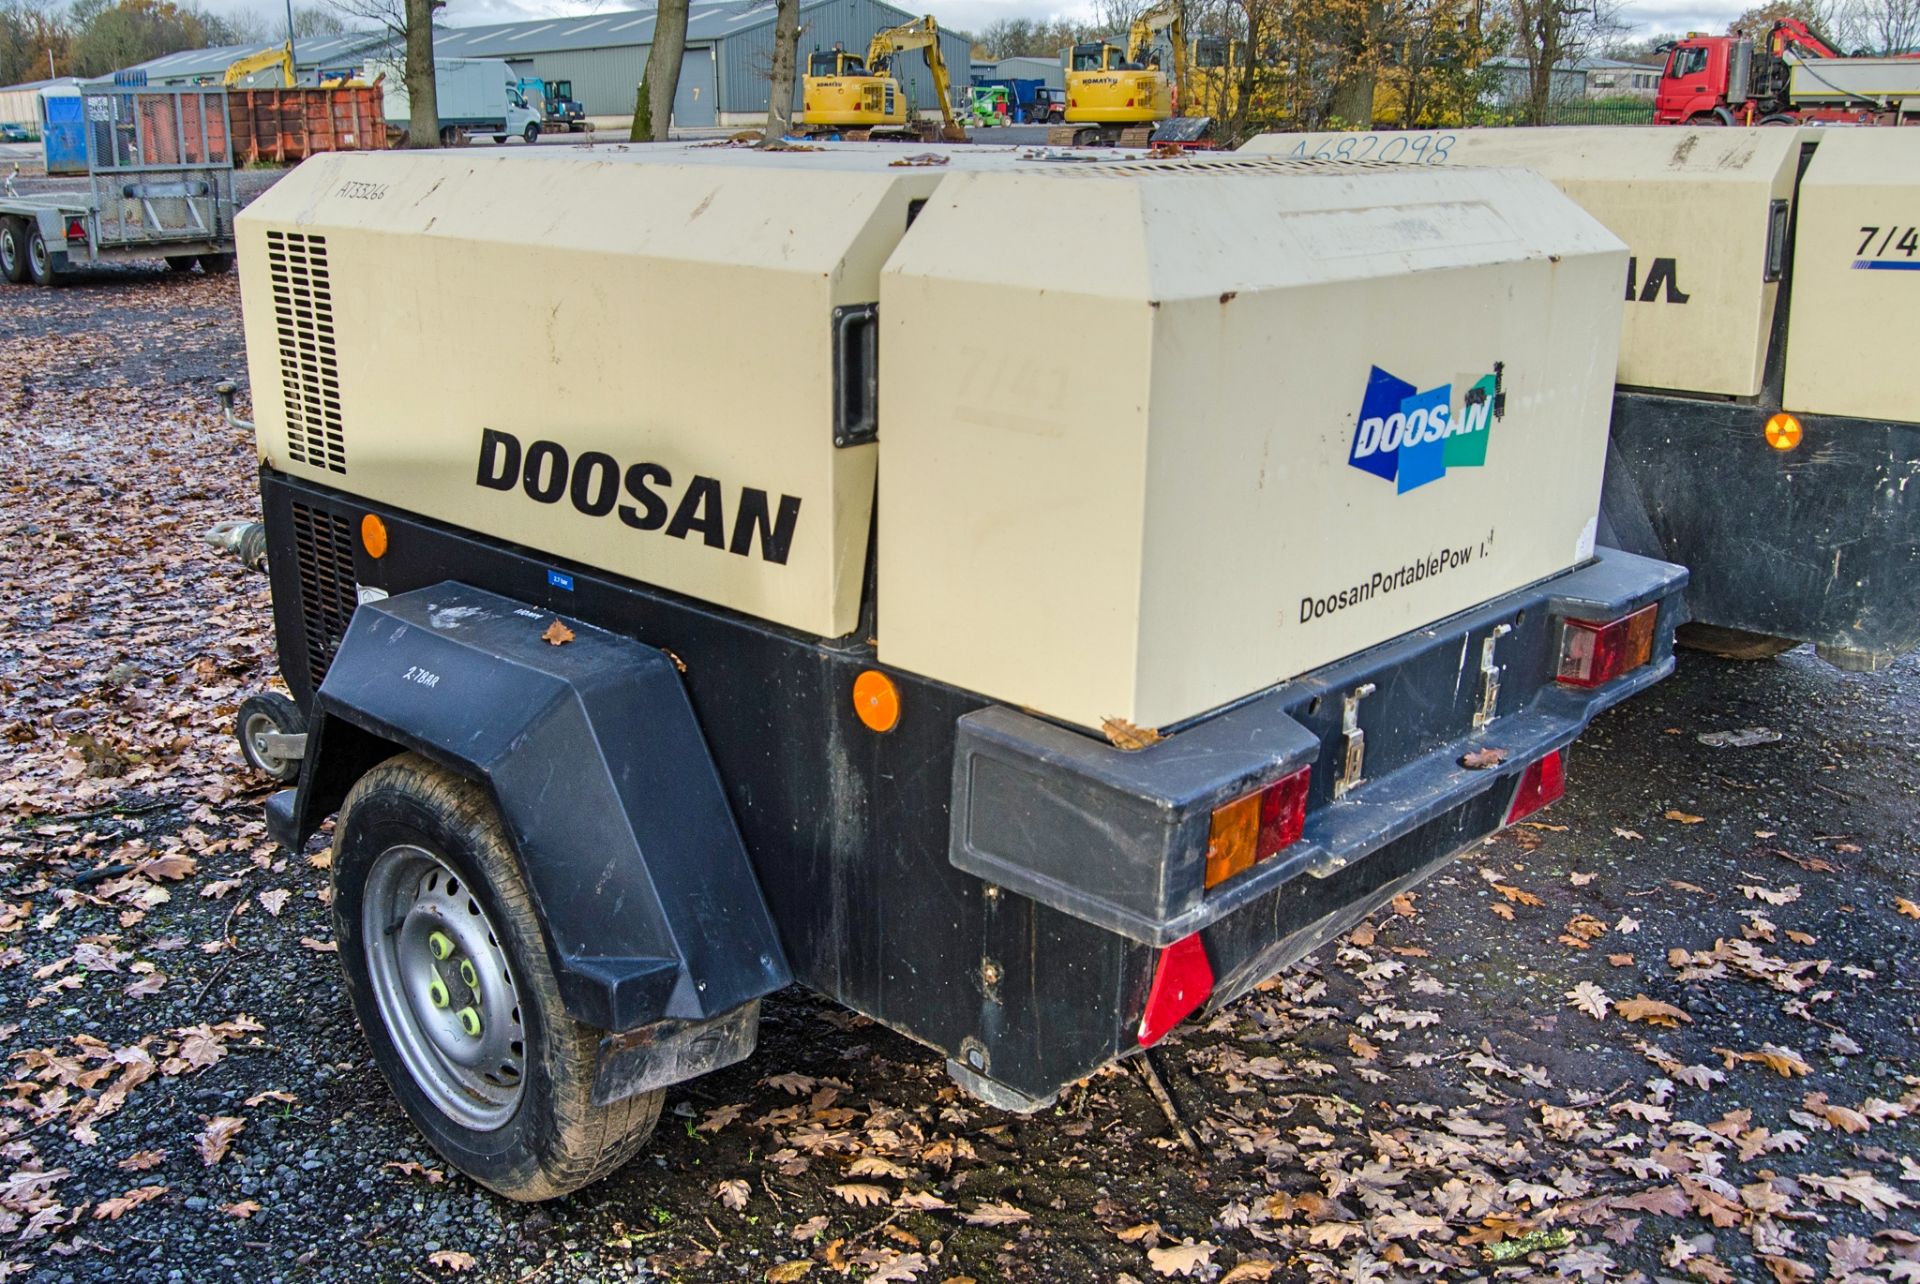 Doosan 7/41 diesel driven fast tow mobile air compressor Year: 2016 S/N: 434225 Recorded Hours: 2314 - Image 4 of 11